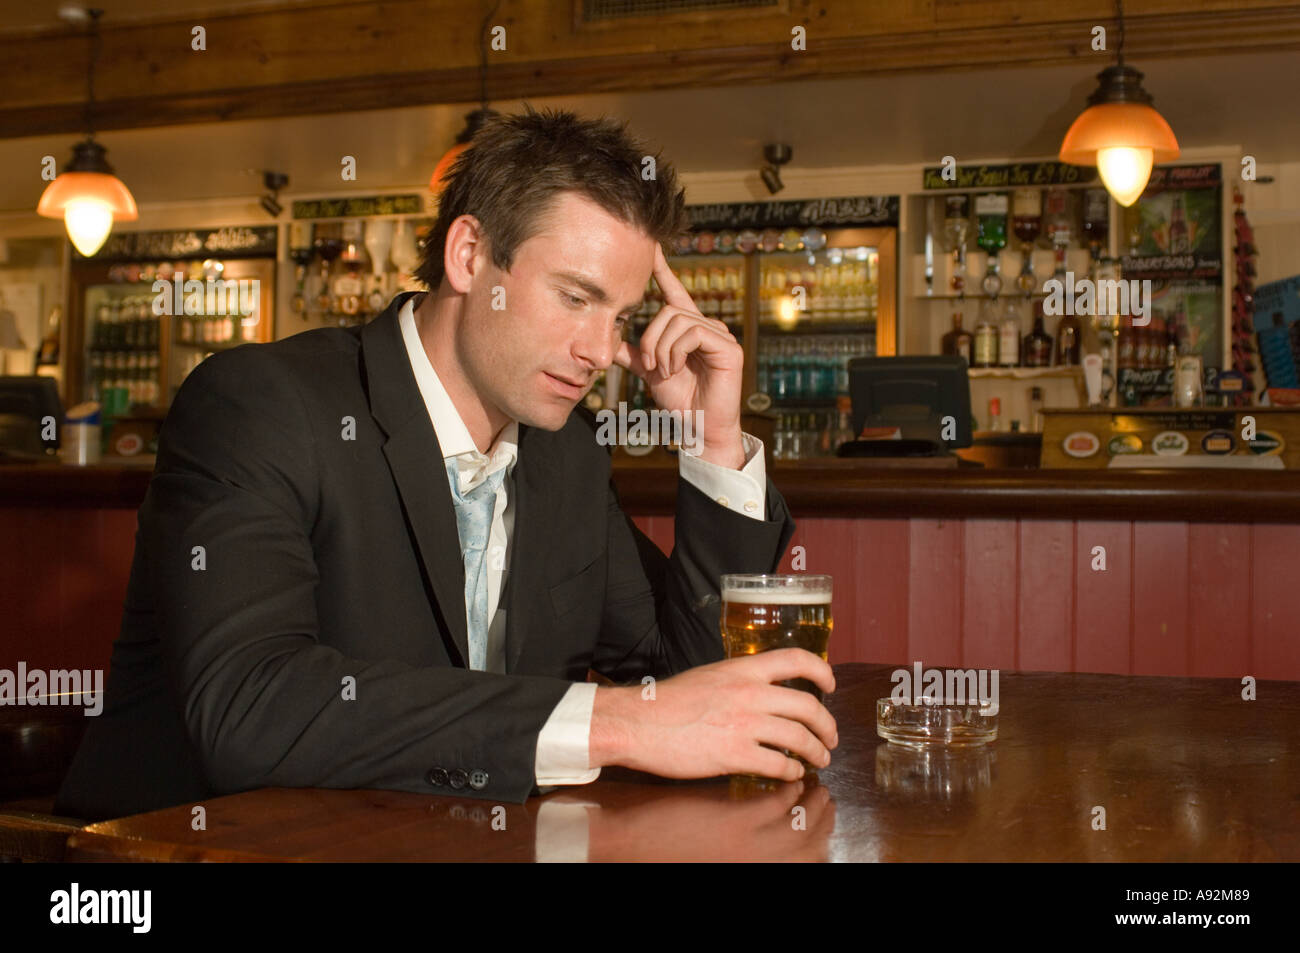 man having a pint in a pub looking thoughtful Stock Photo